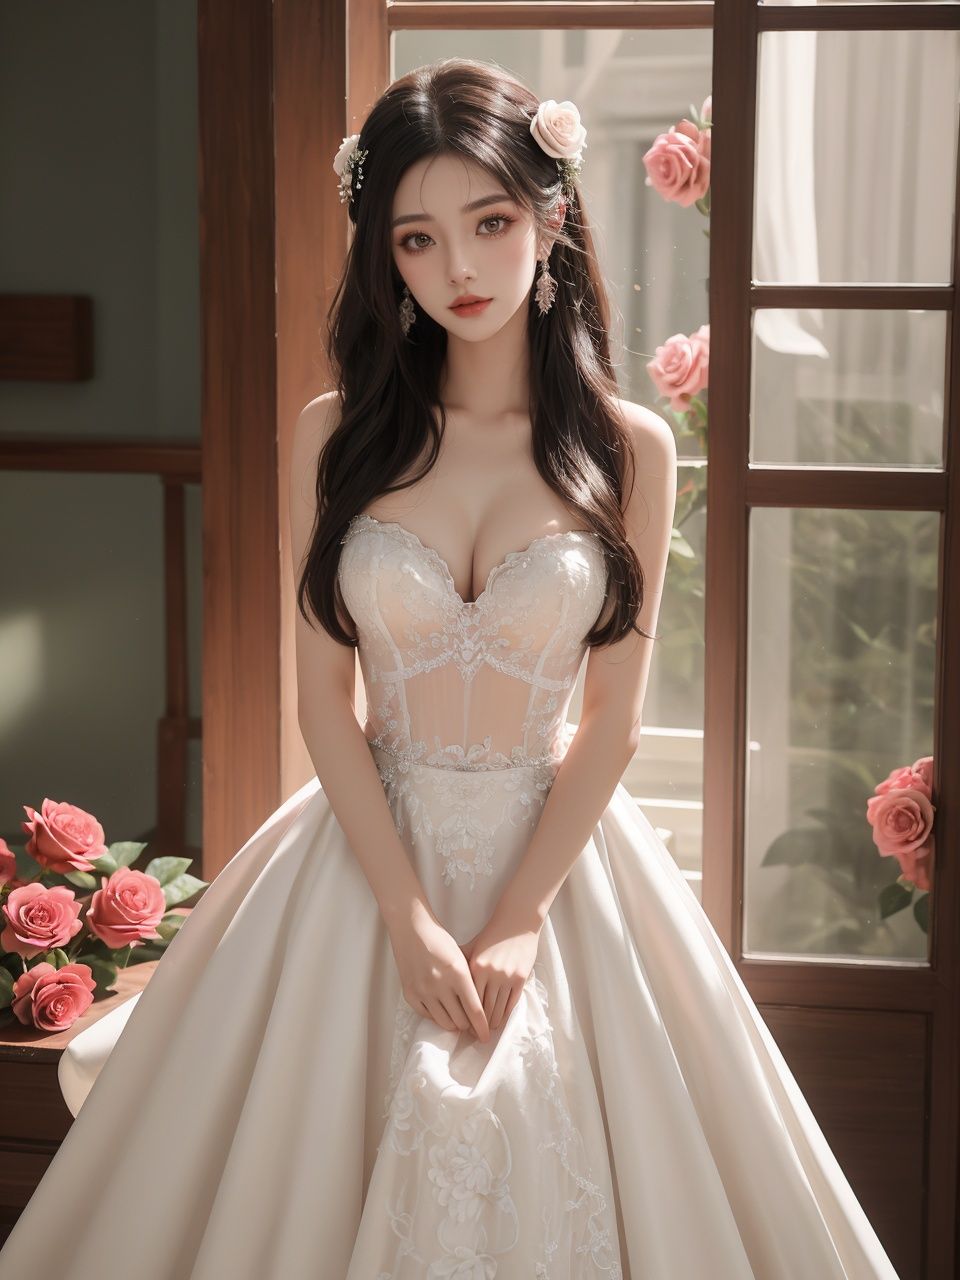 masterpiece,1 girl,22 years old,Look at me,Exquisite makeup,Black hair,Long hair,white wedding dress,Wipe the chest,Indoor,Exquisite decoration,Bright light,Stand,In the middle of the picture,Whole body,Plenty of roses,textured skin,super detail,best quality,